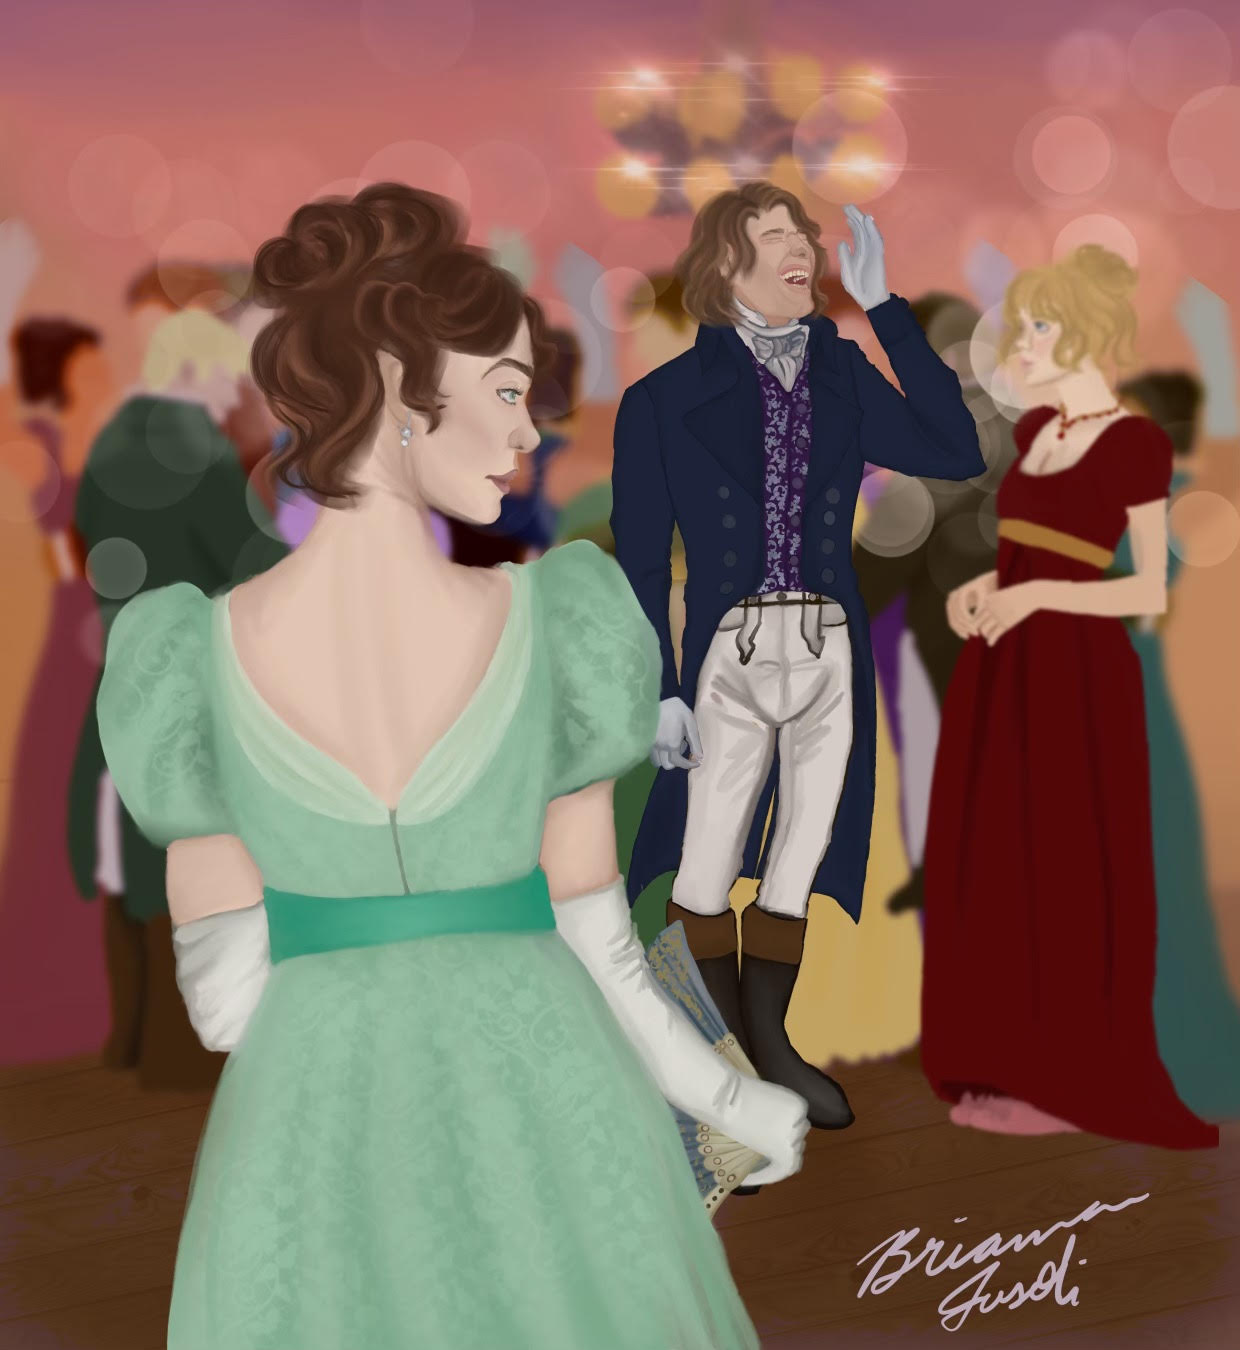 Illustration of young woman at a ball observing a prince laughing with another woman